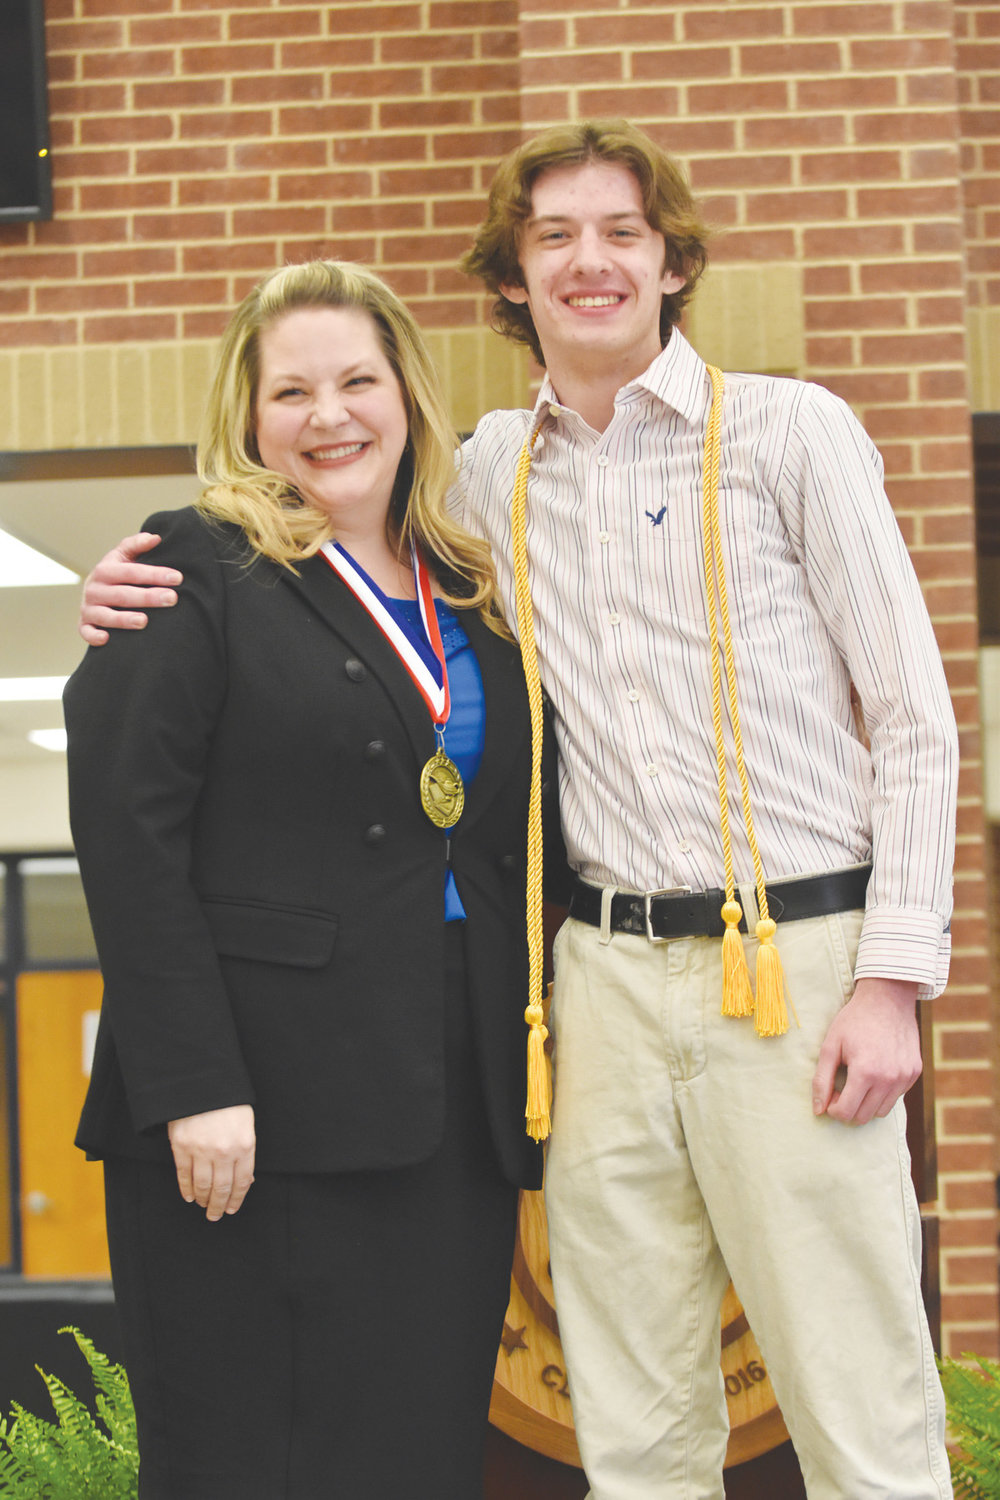 Jacob Deatherage is the son of Eric and Rebecca Deatherage. Jacob plans to attend Texas A&M University, study psychology, and eventually become a professional airline pilot. Jacob honored Mrs. Amber Wheeler.